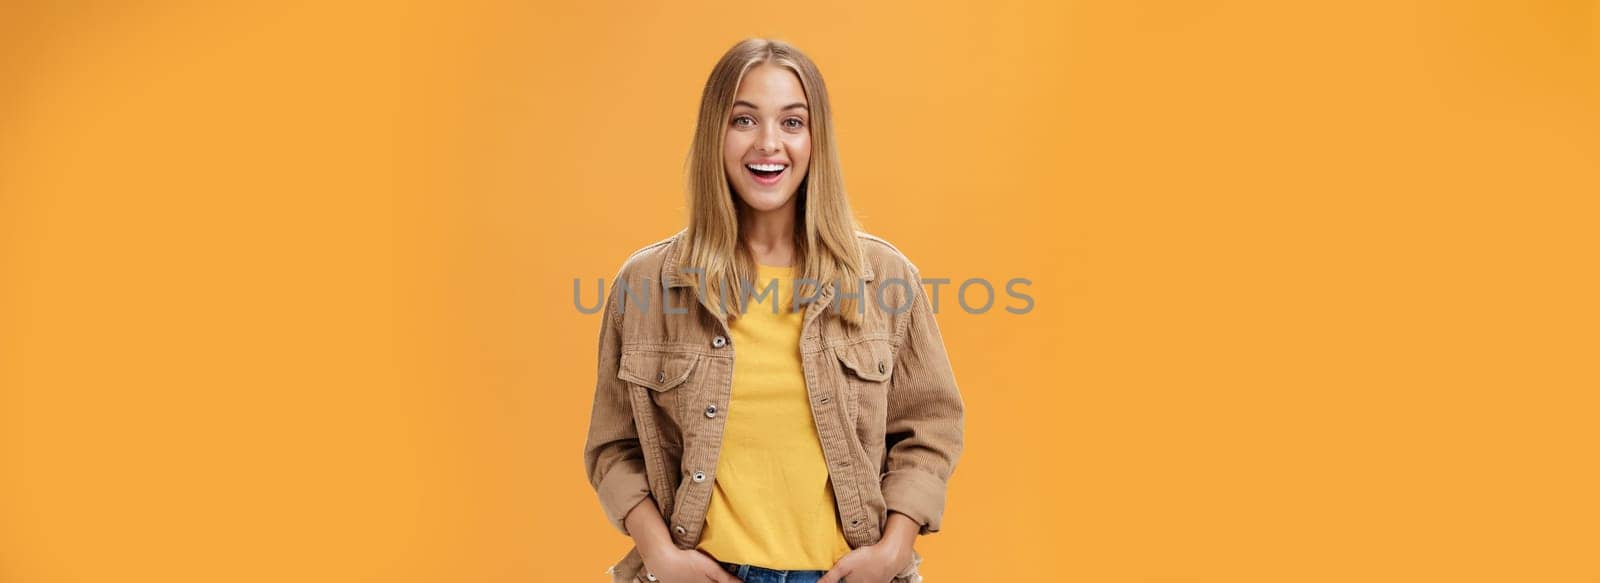 Charismatic tanned woman in corduroy jacket and yellow t-shirt ready for chilly autumn walk with friends smiling joyfully gazing entertained at camera holding hand in pockets casually over orange wall by Benzoix